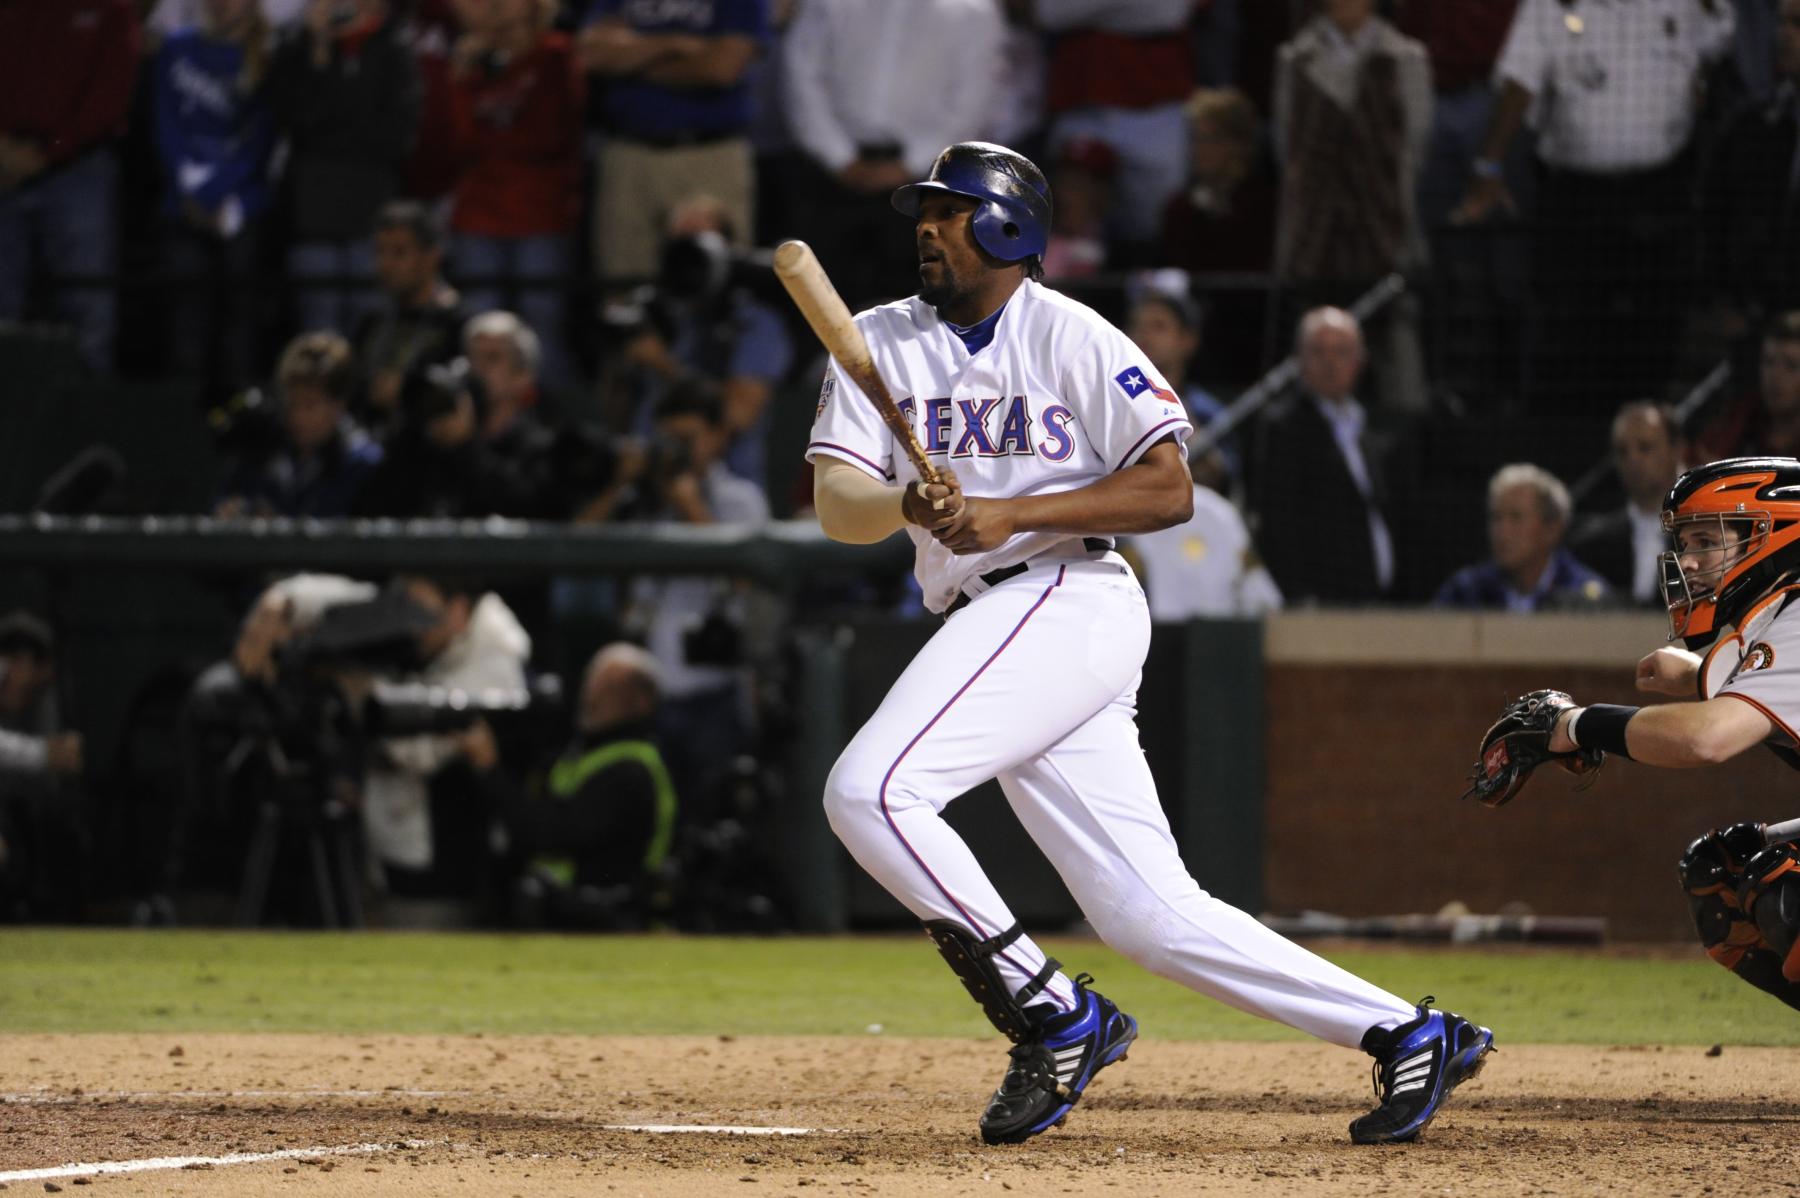 Rangers appear to be leader to sign Vladimir Guerrero's son, Pablo